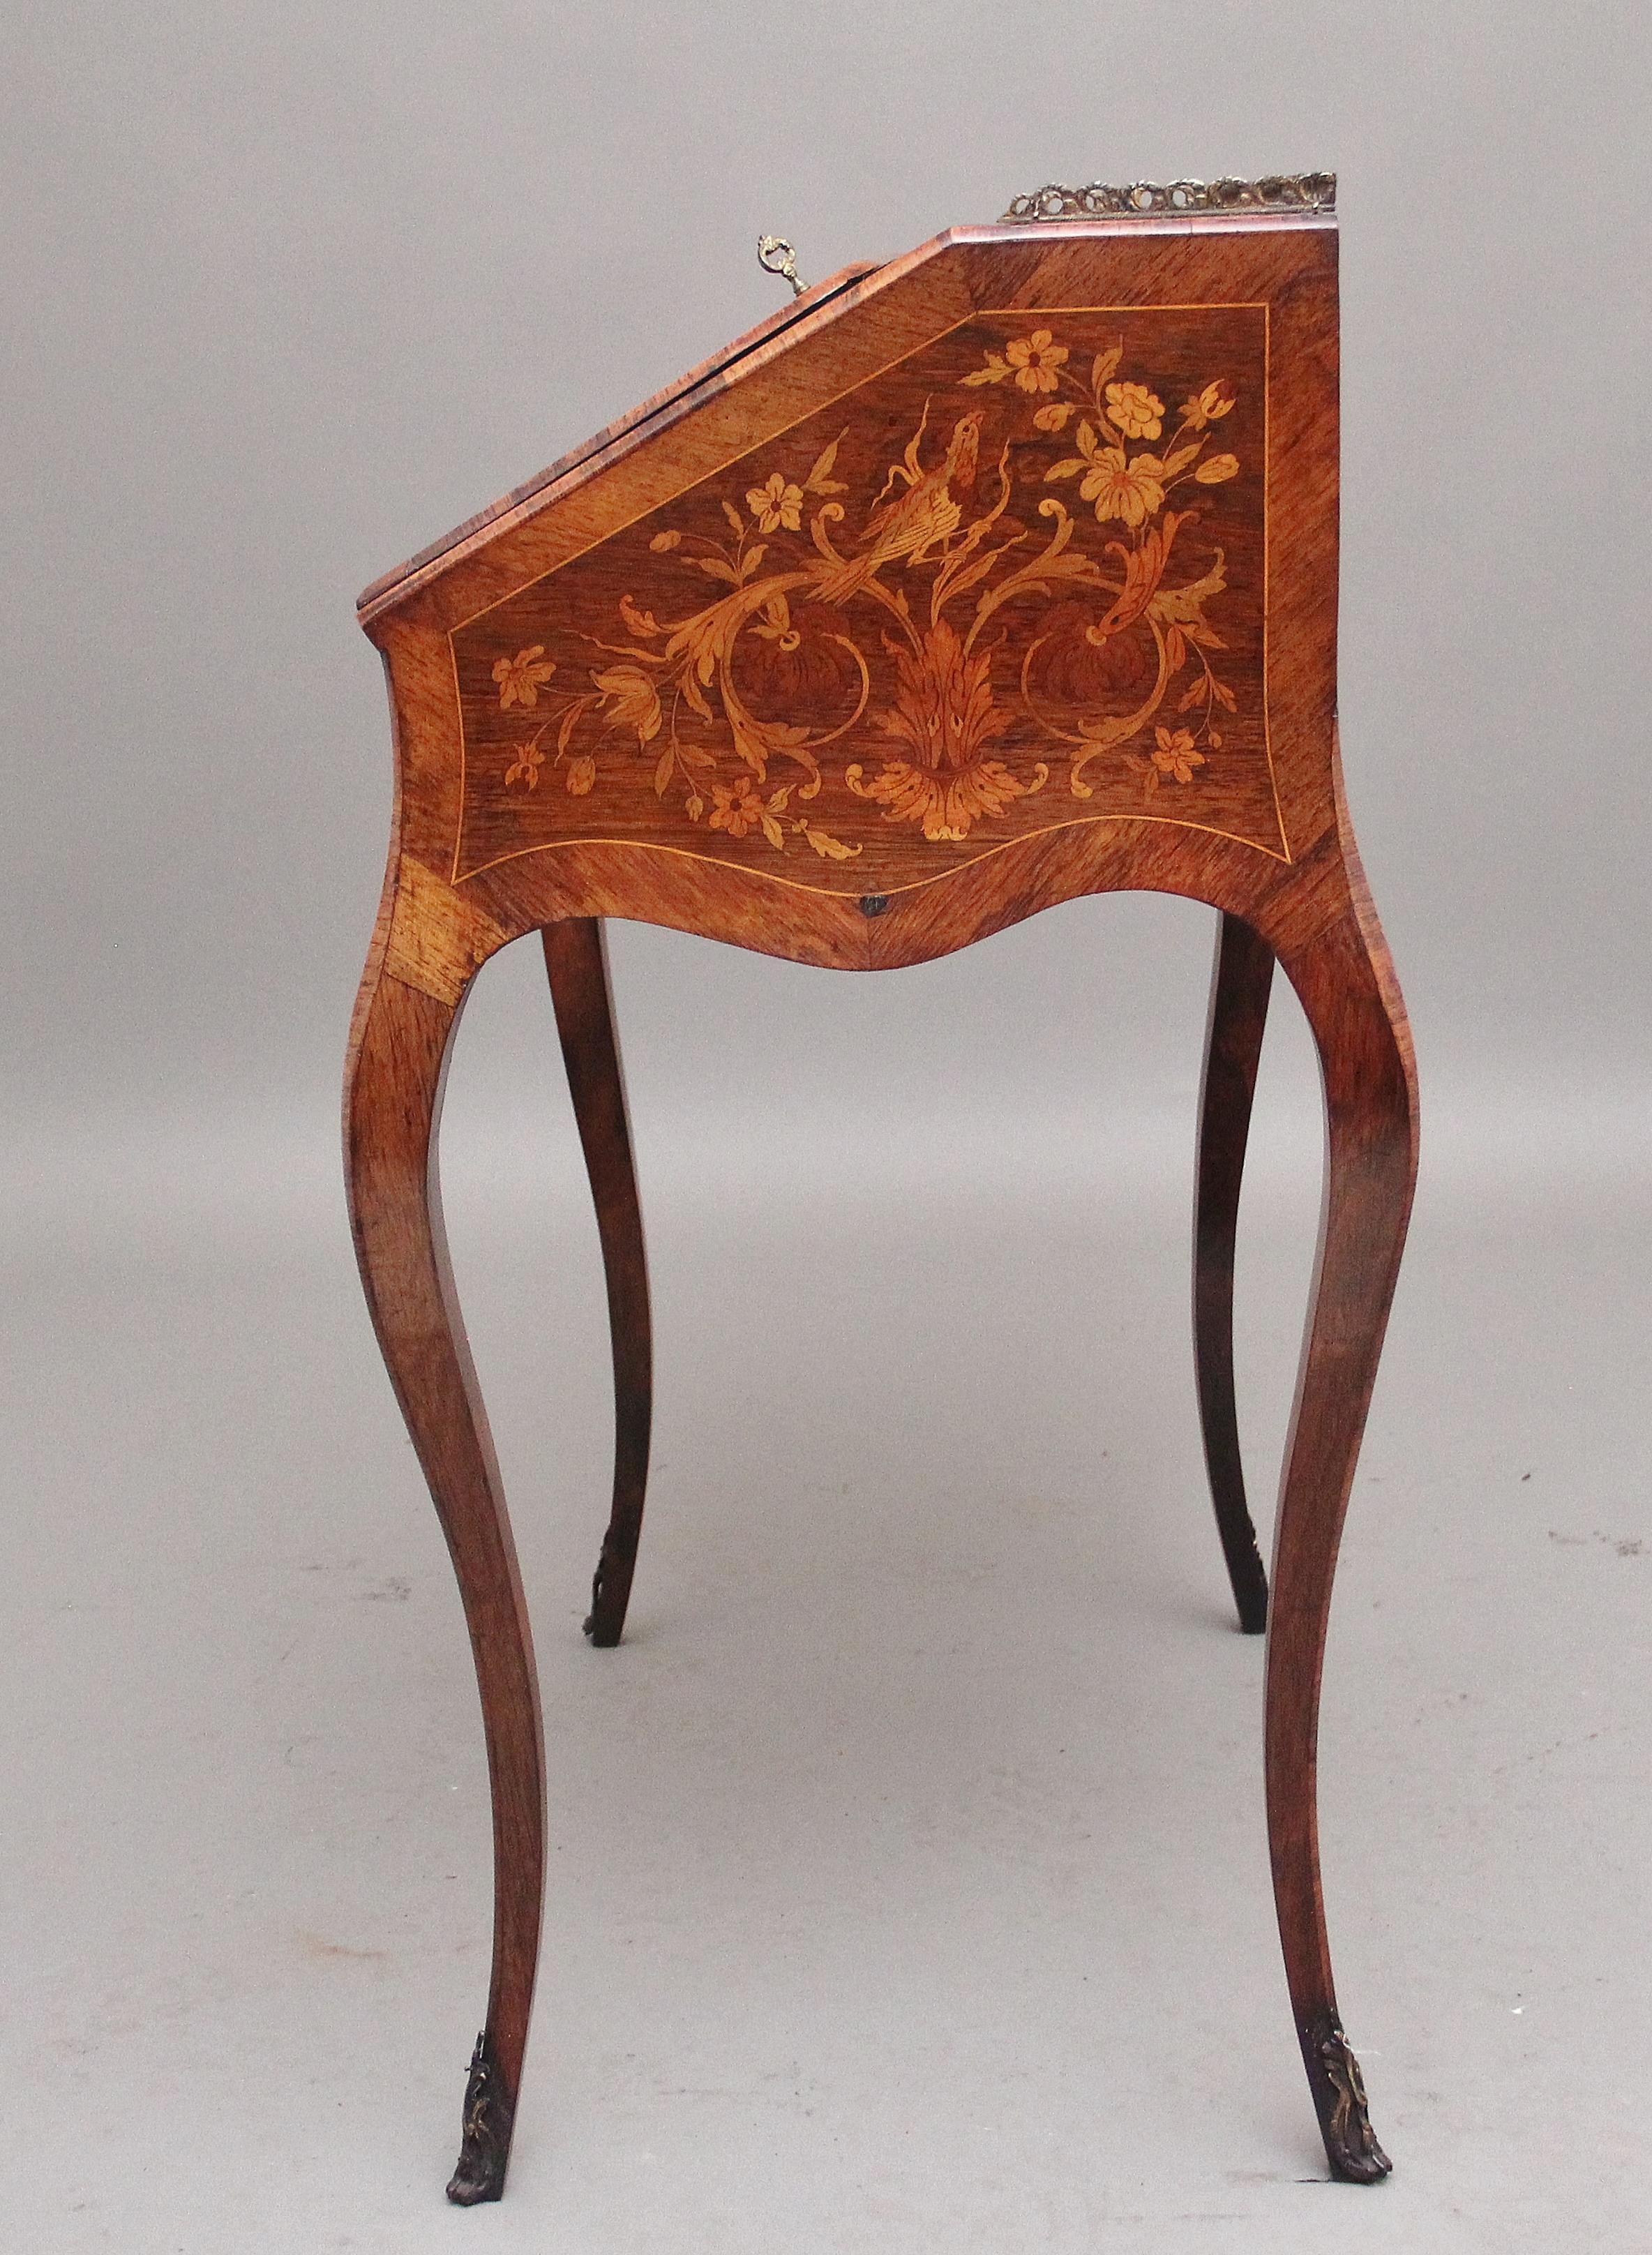 Superb Quality Freestanding 19th Century Kingwood and Marquetry Inlaid Bureau For Sale 4